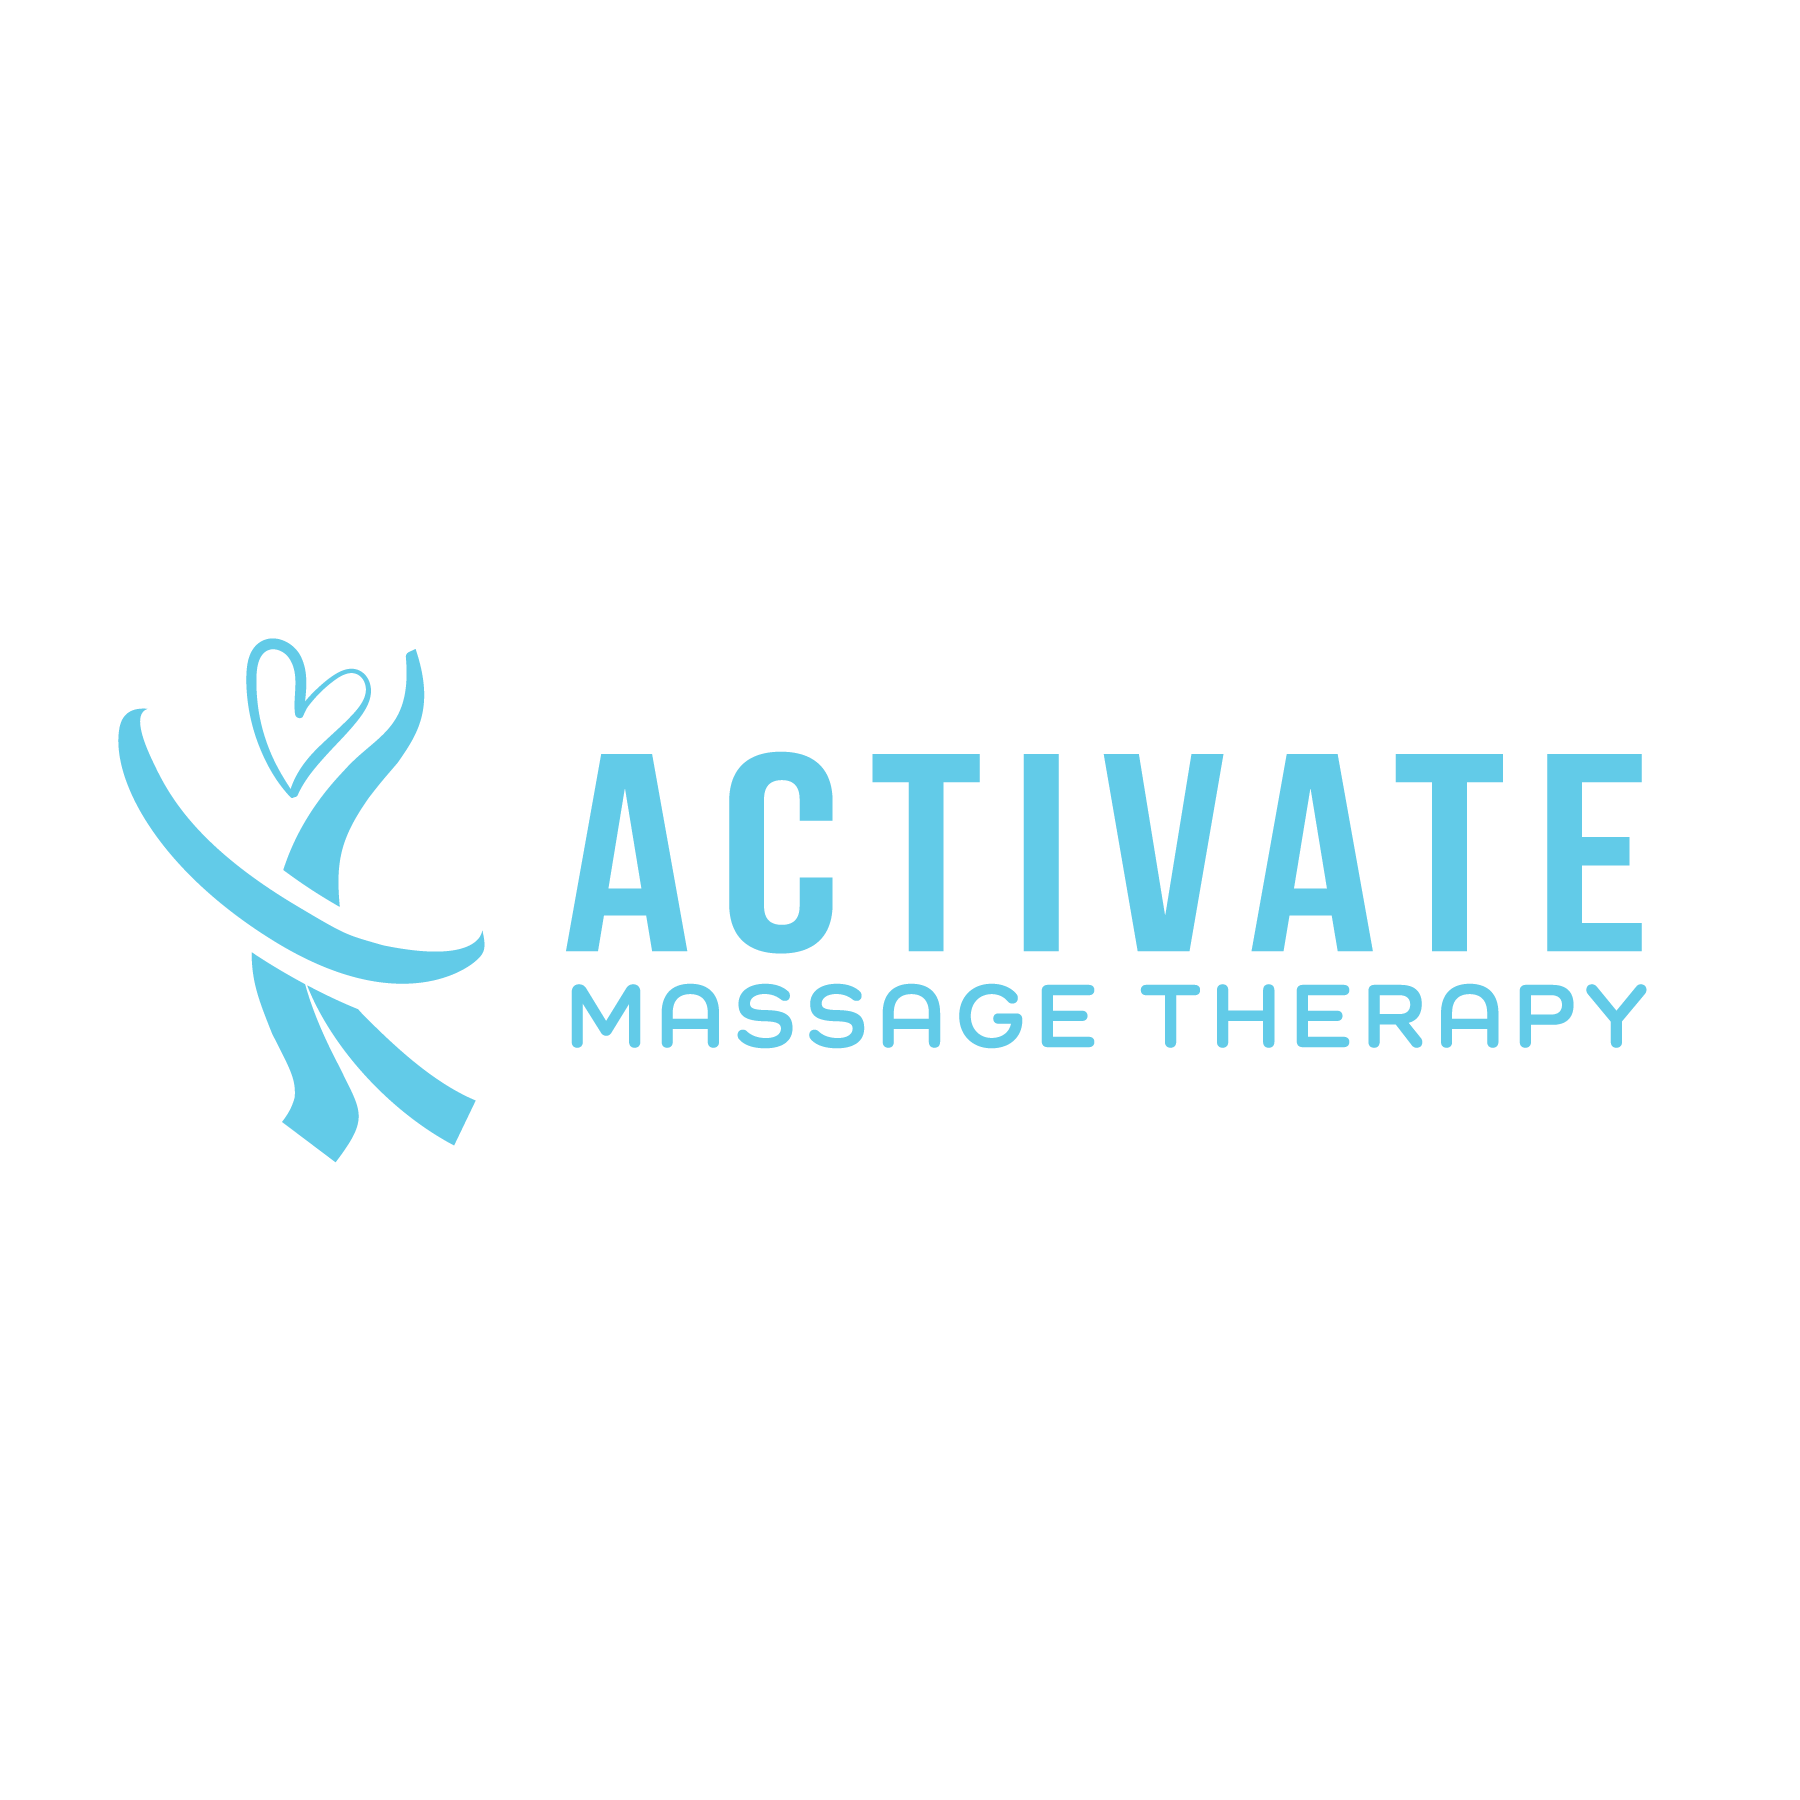 Activate Massage Therapy